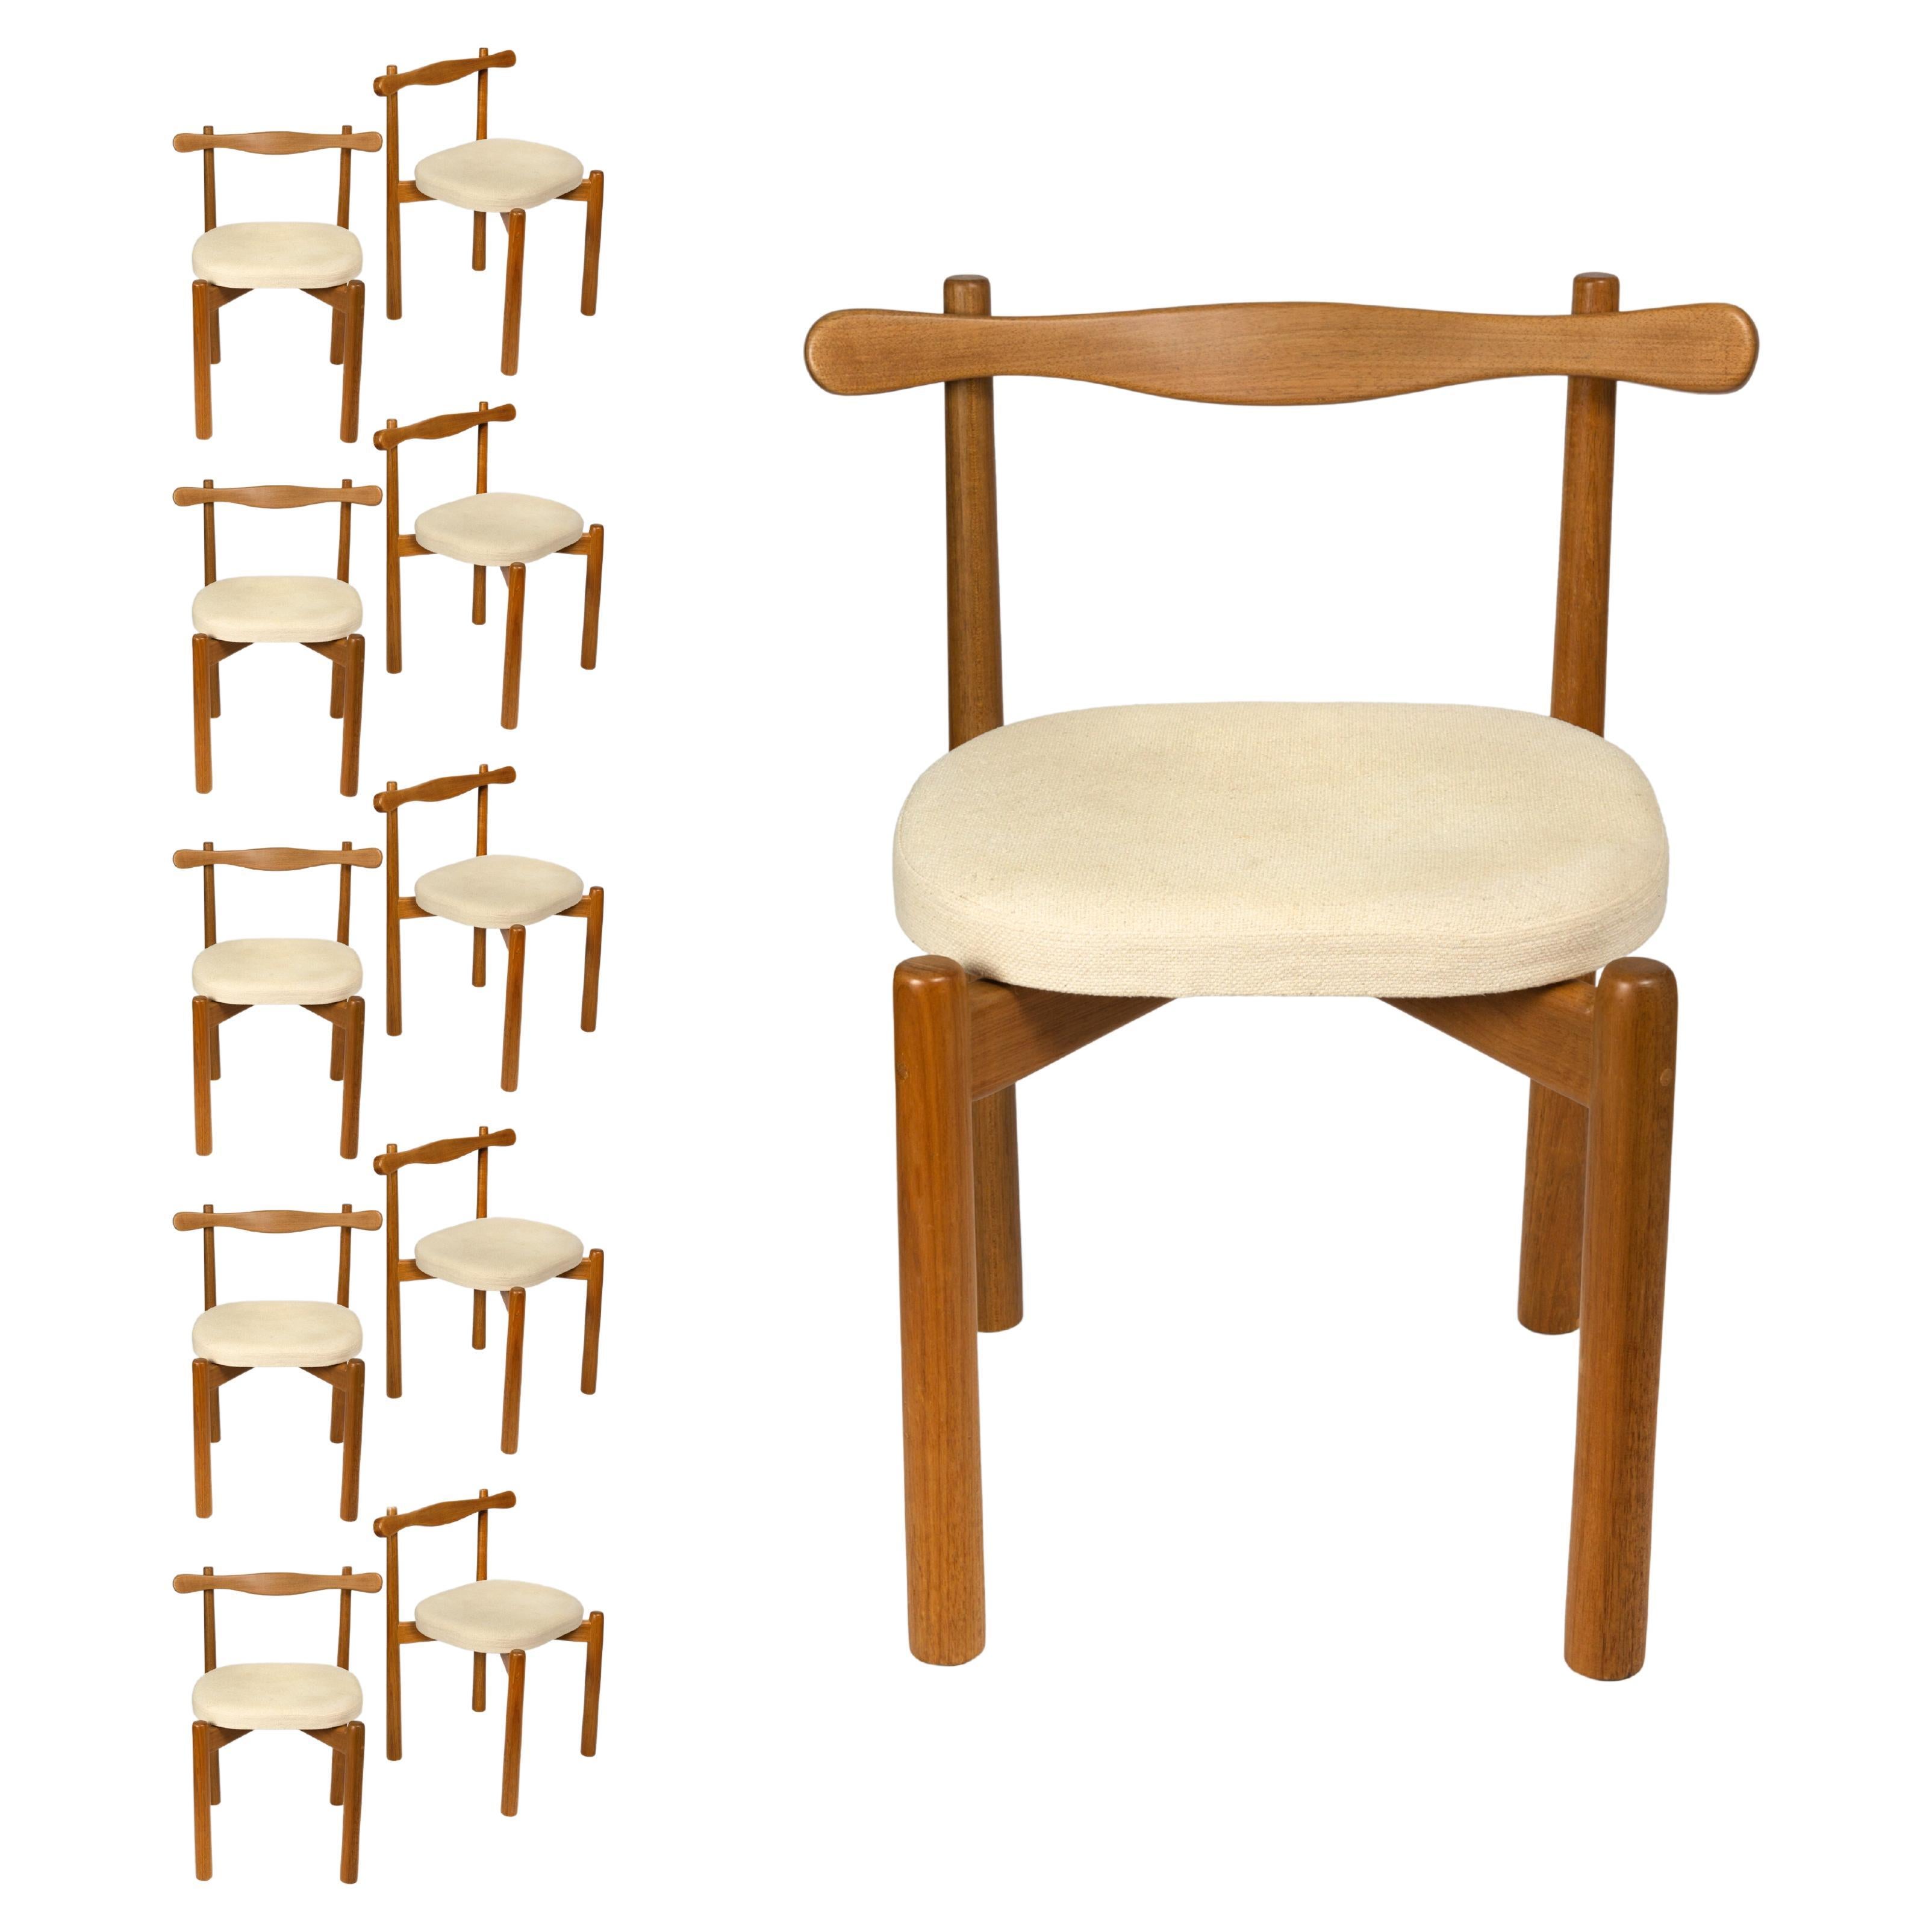 Set of 10 Dining Chairs Uçá Light Brown Wood (fabric ref : F13) For Sale